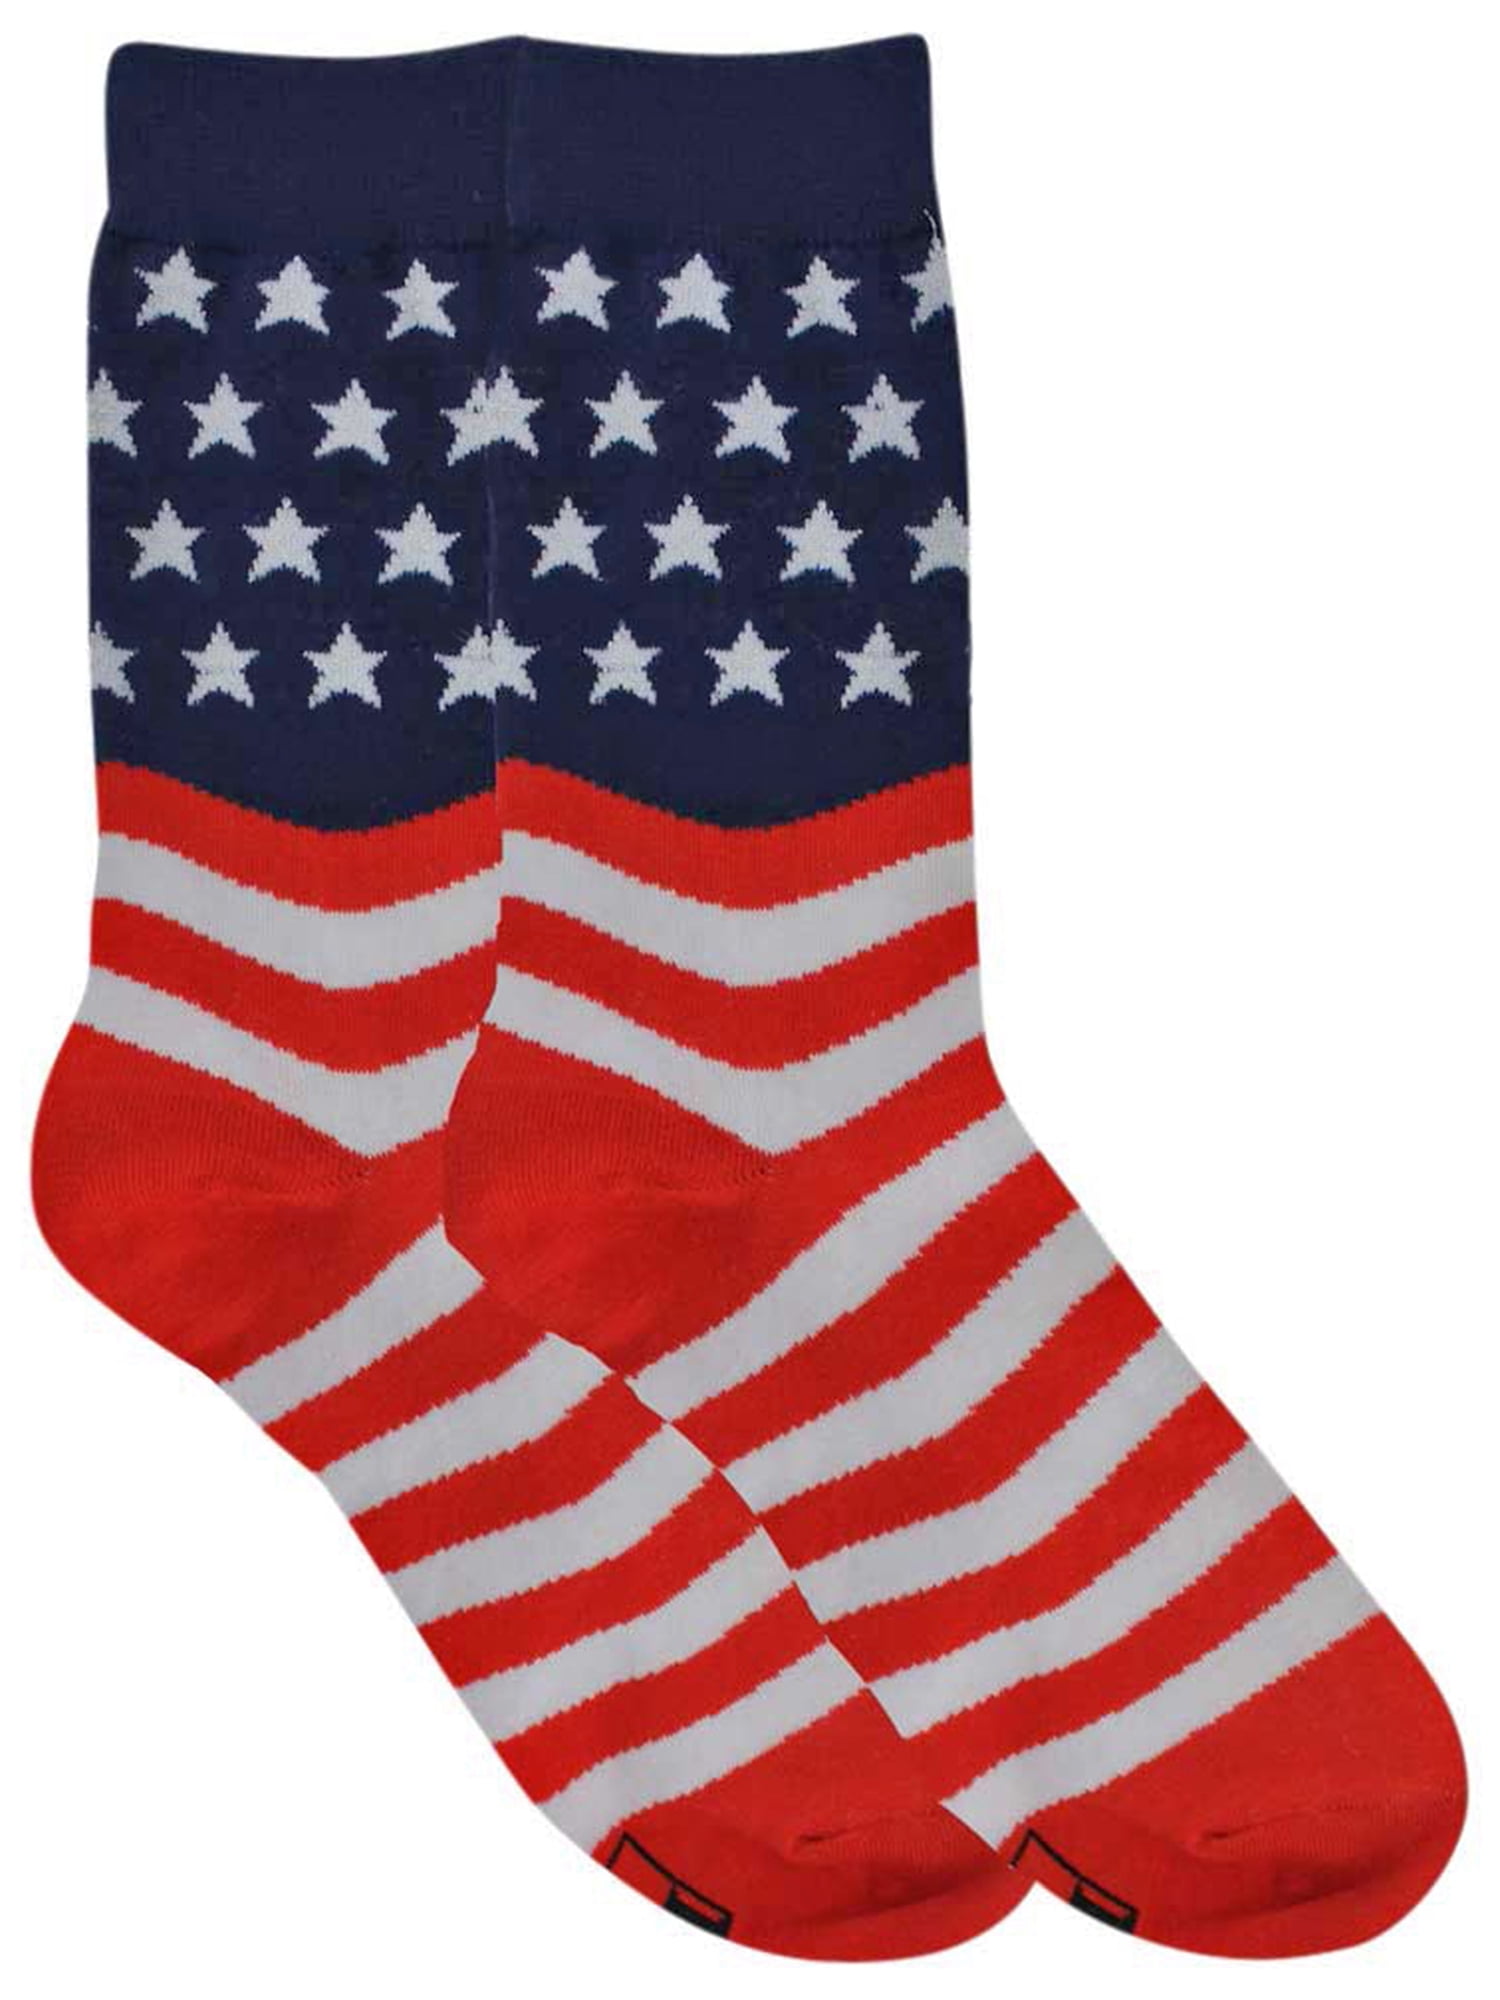 US Patriotic Socks with heart printing in flag colors Comfortable Socks with cushioned bottom Good luck socks with crisp bold colors print